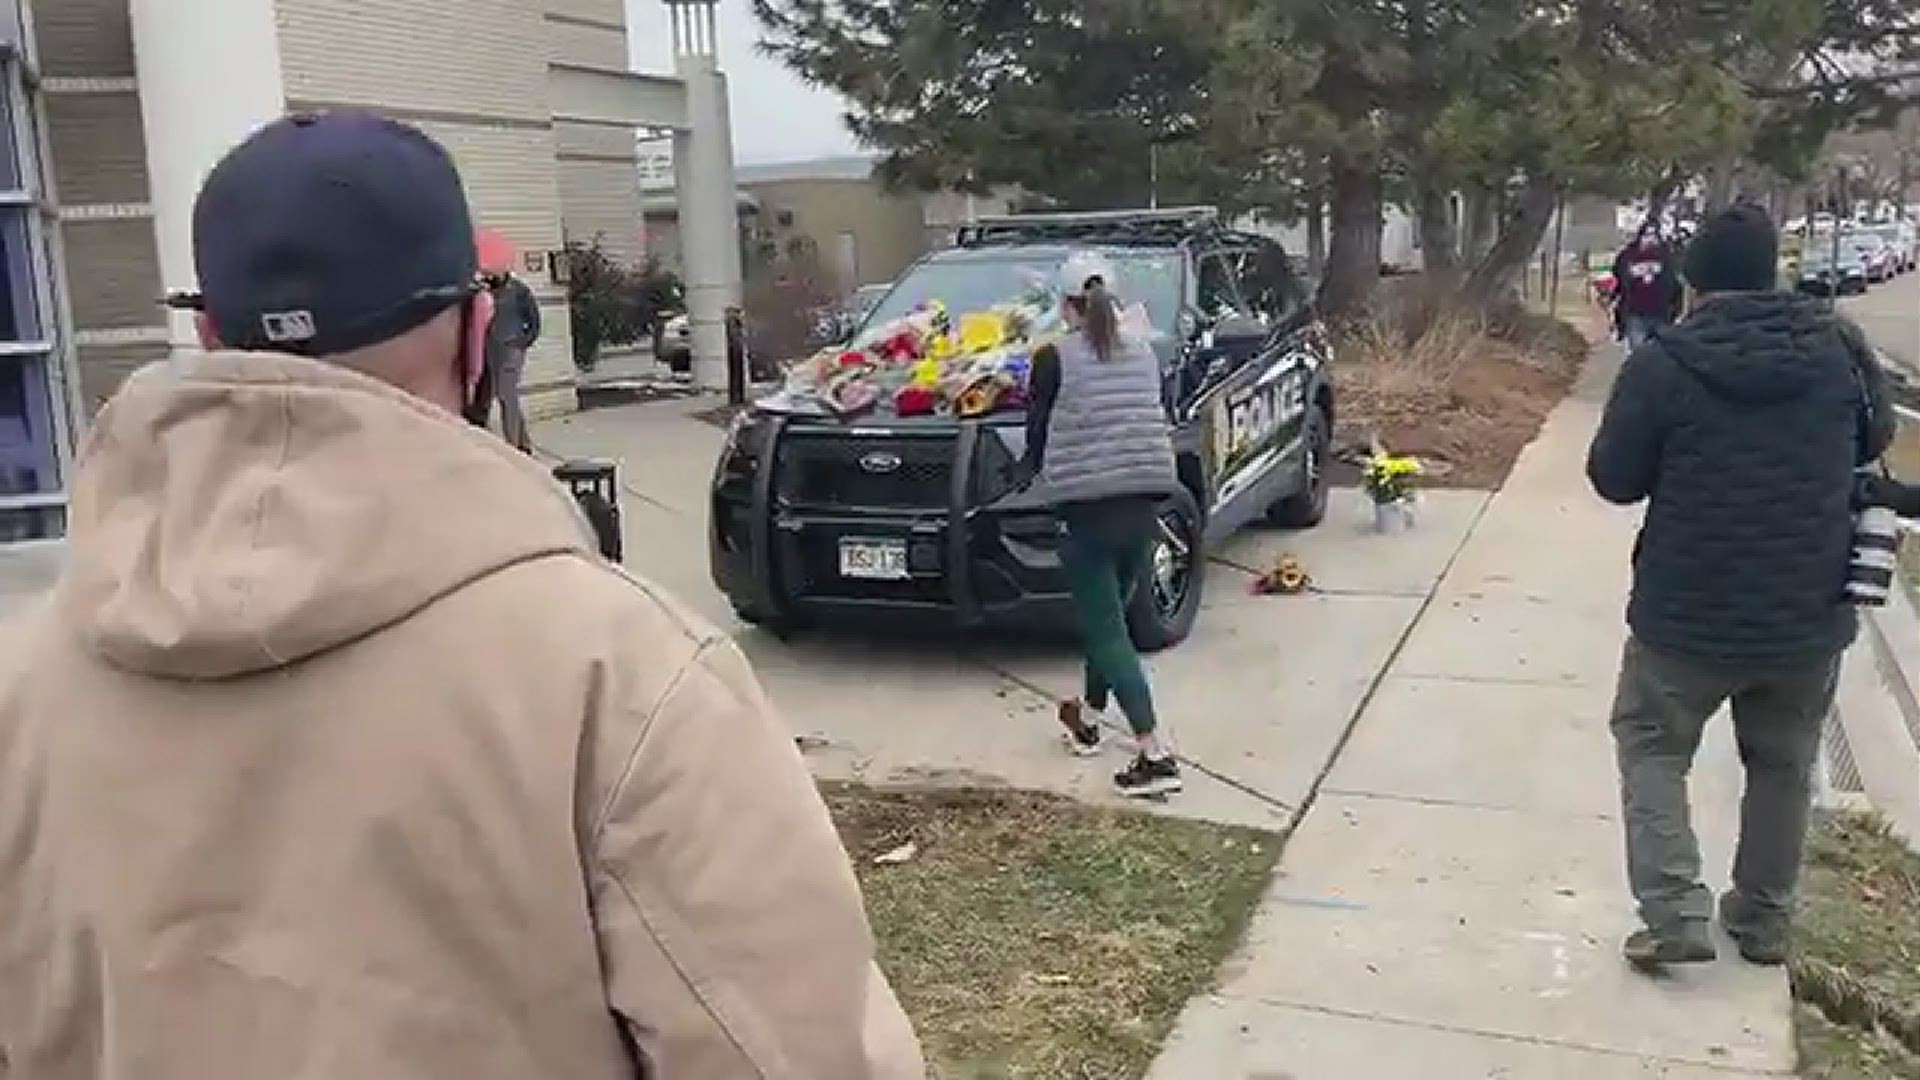 Members of the community are placing flowers on a Boulder patrol car out of respect for the fallen officer and the 9 other victims of Monday’s King Soopers shooting.